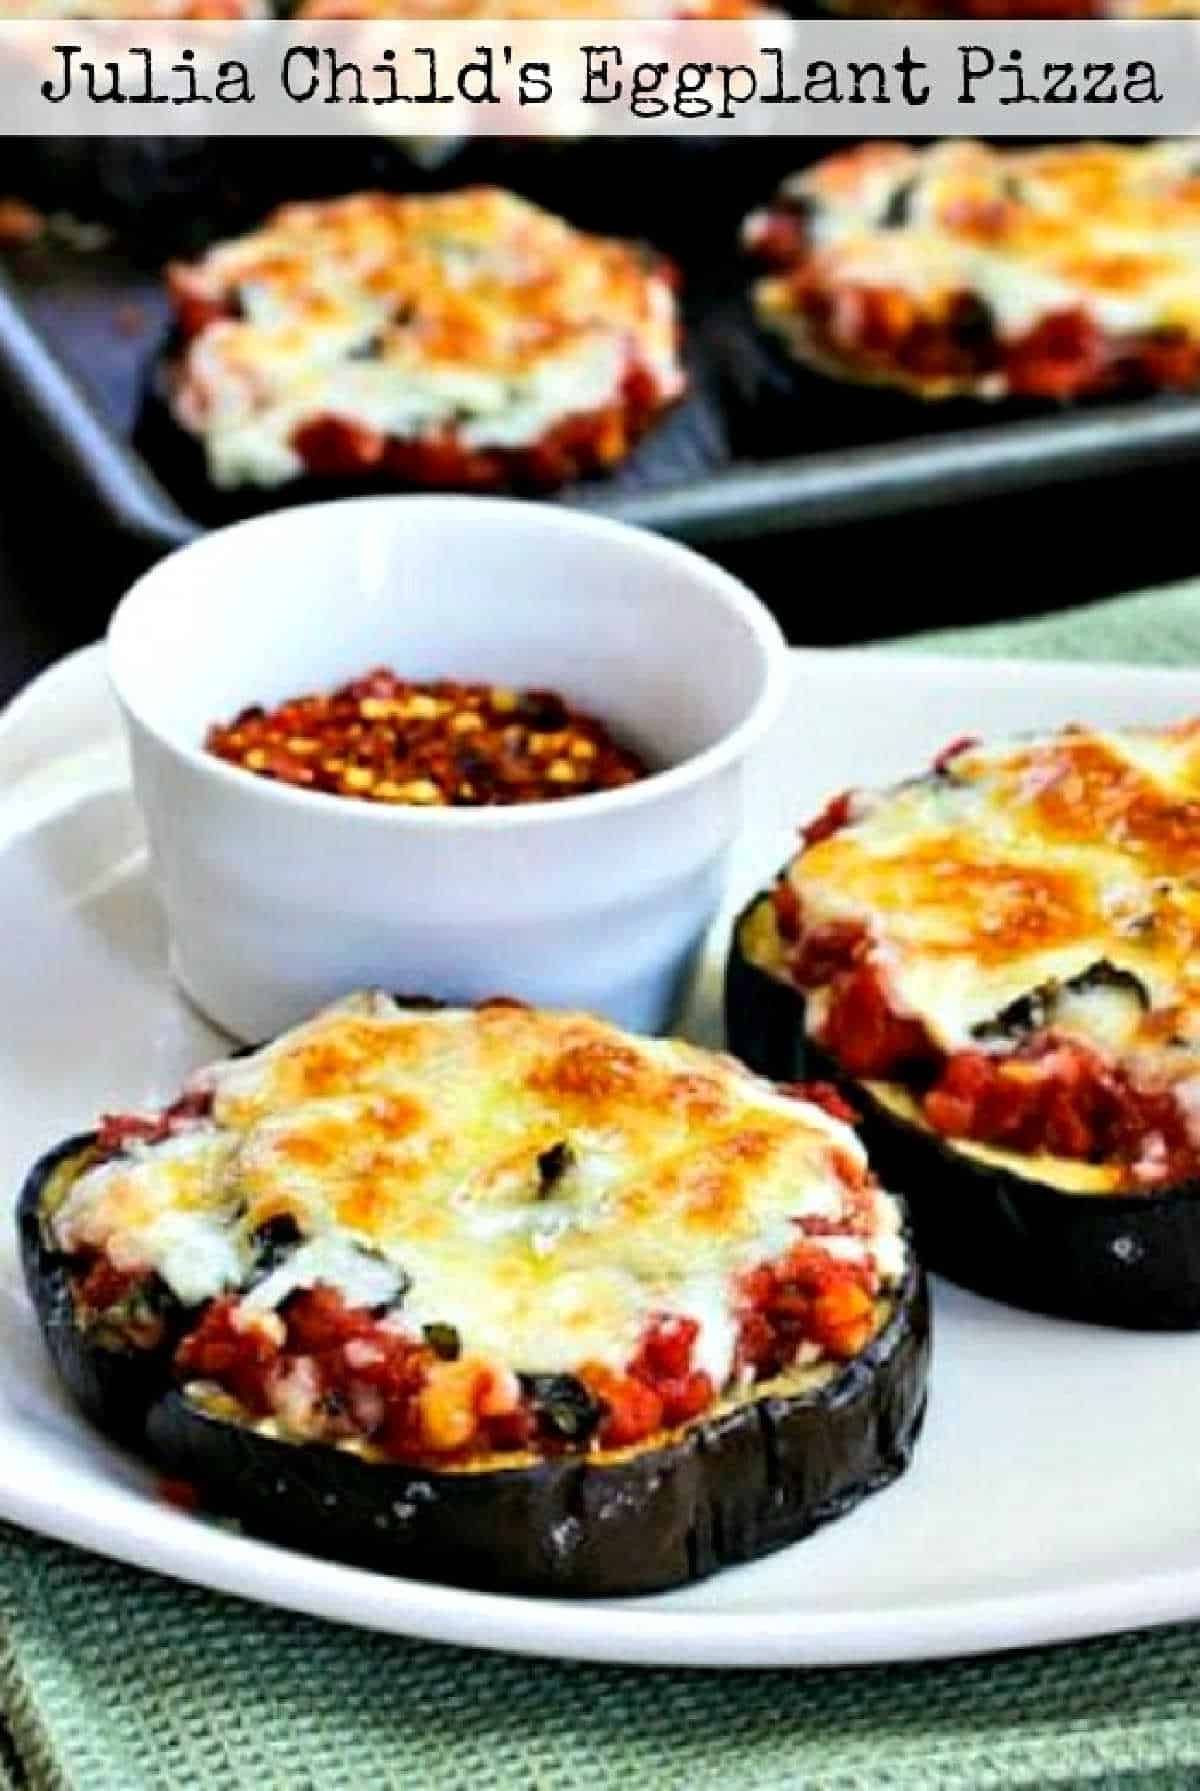 Julia's eggplant pizza for kids shown on a plate with roasting tray in the background